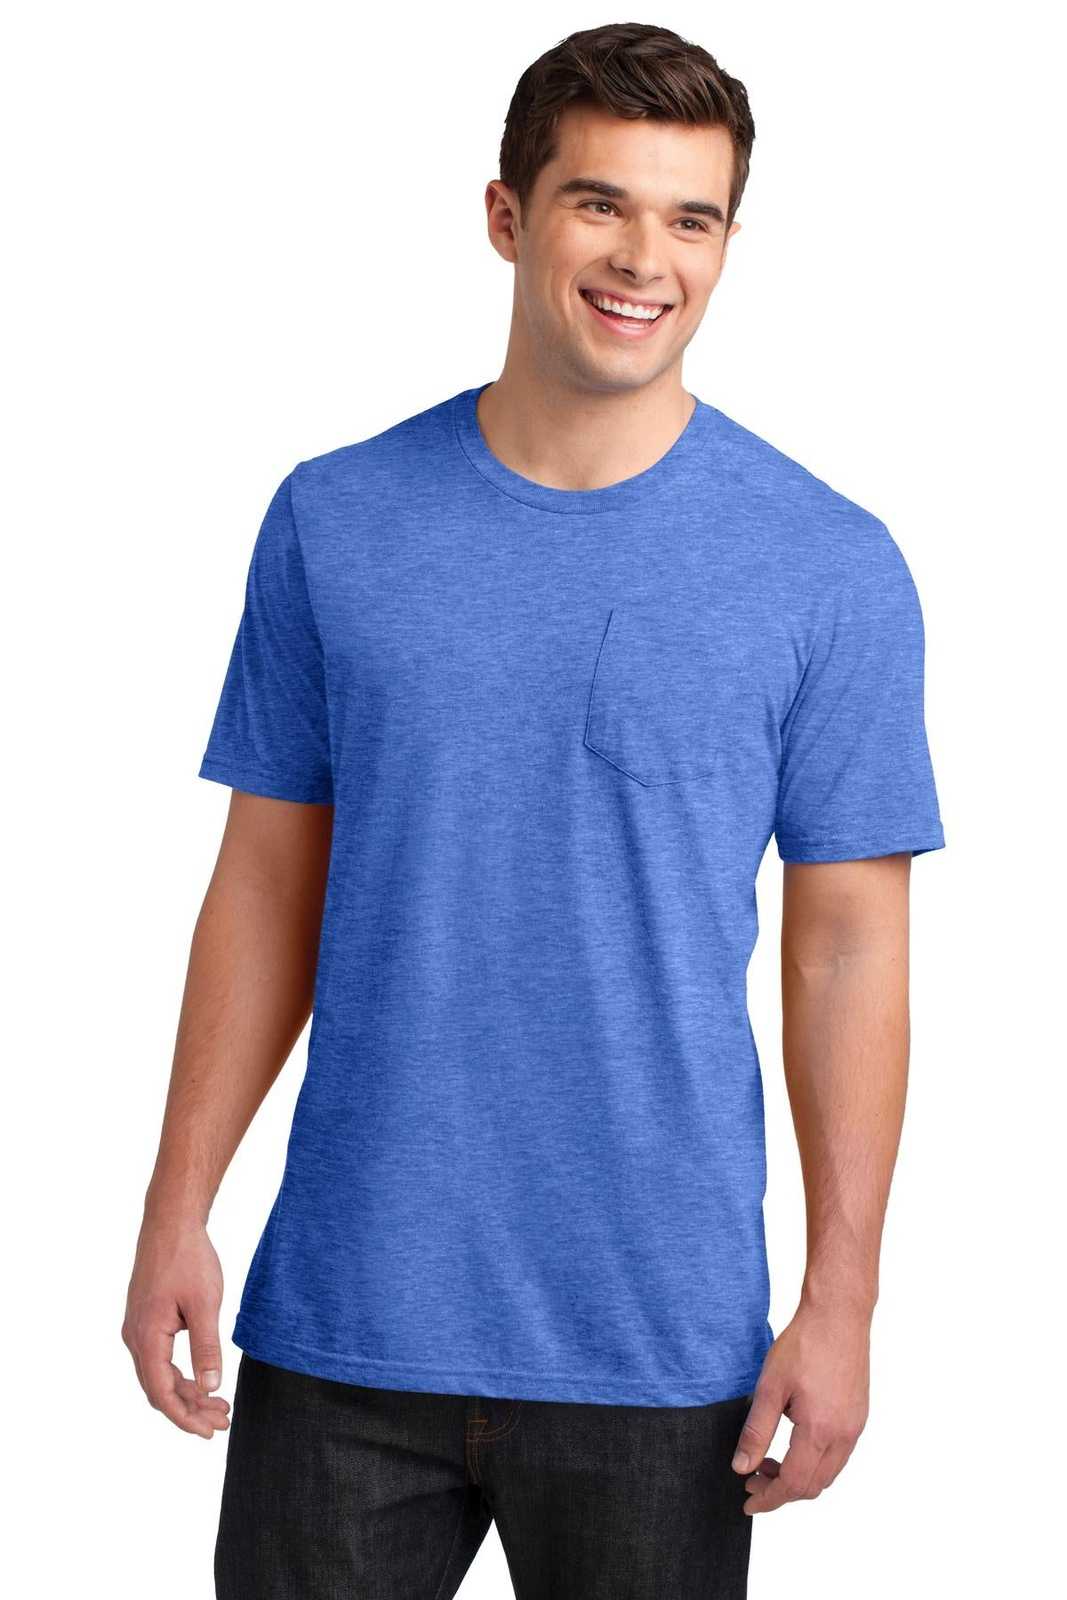 District DT6000P Very Important Tee with Pocket - Heathered Royal - HIT a Double - 1